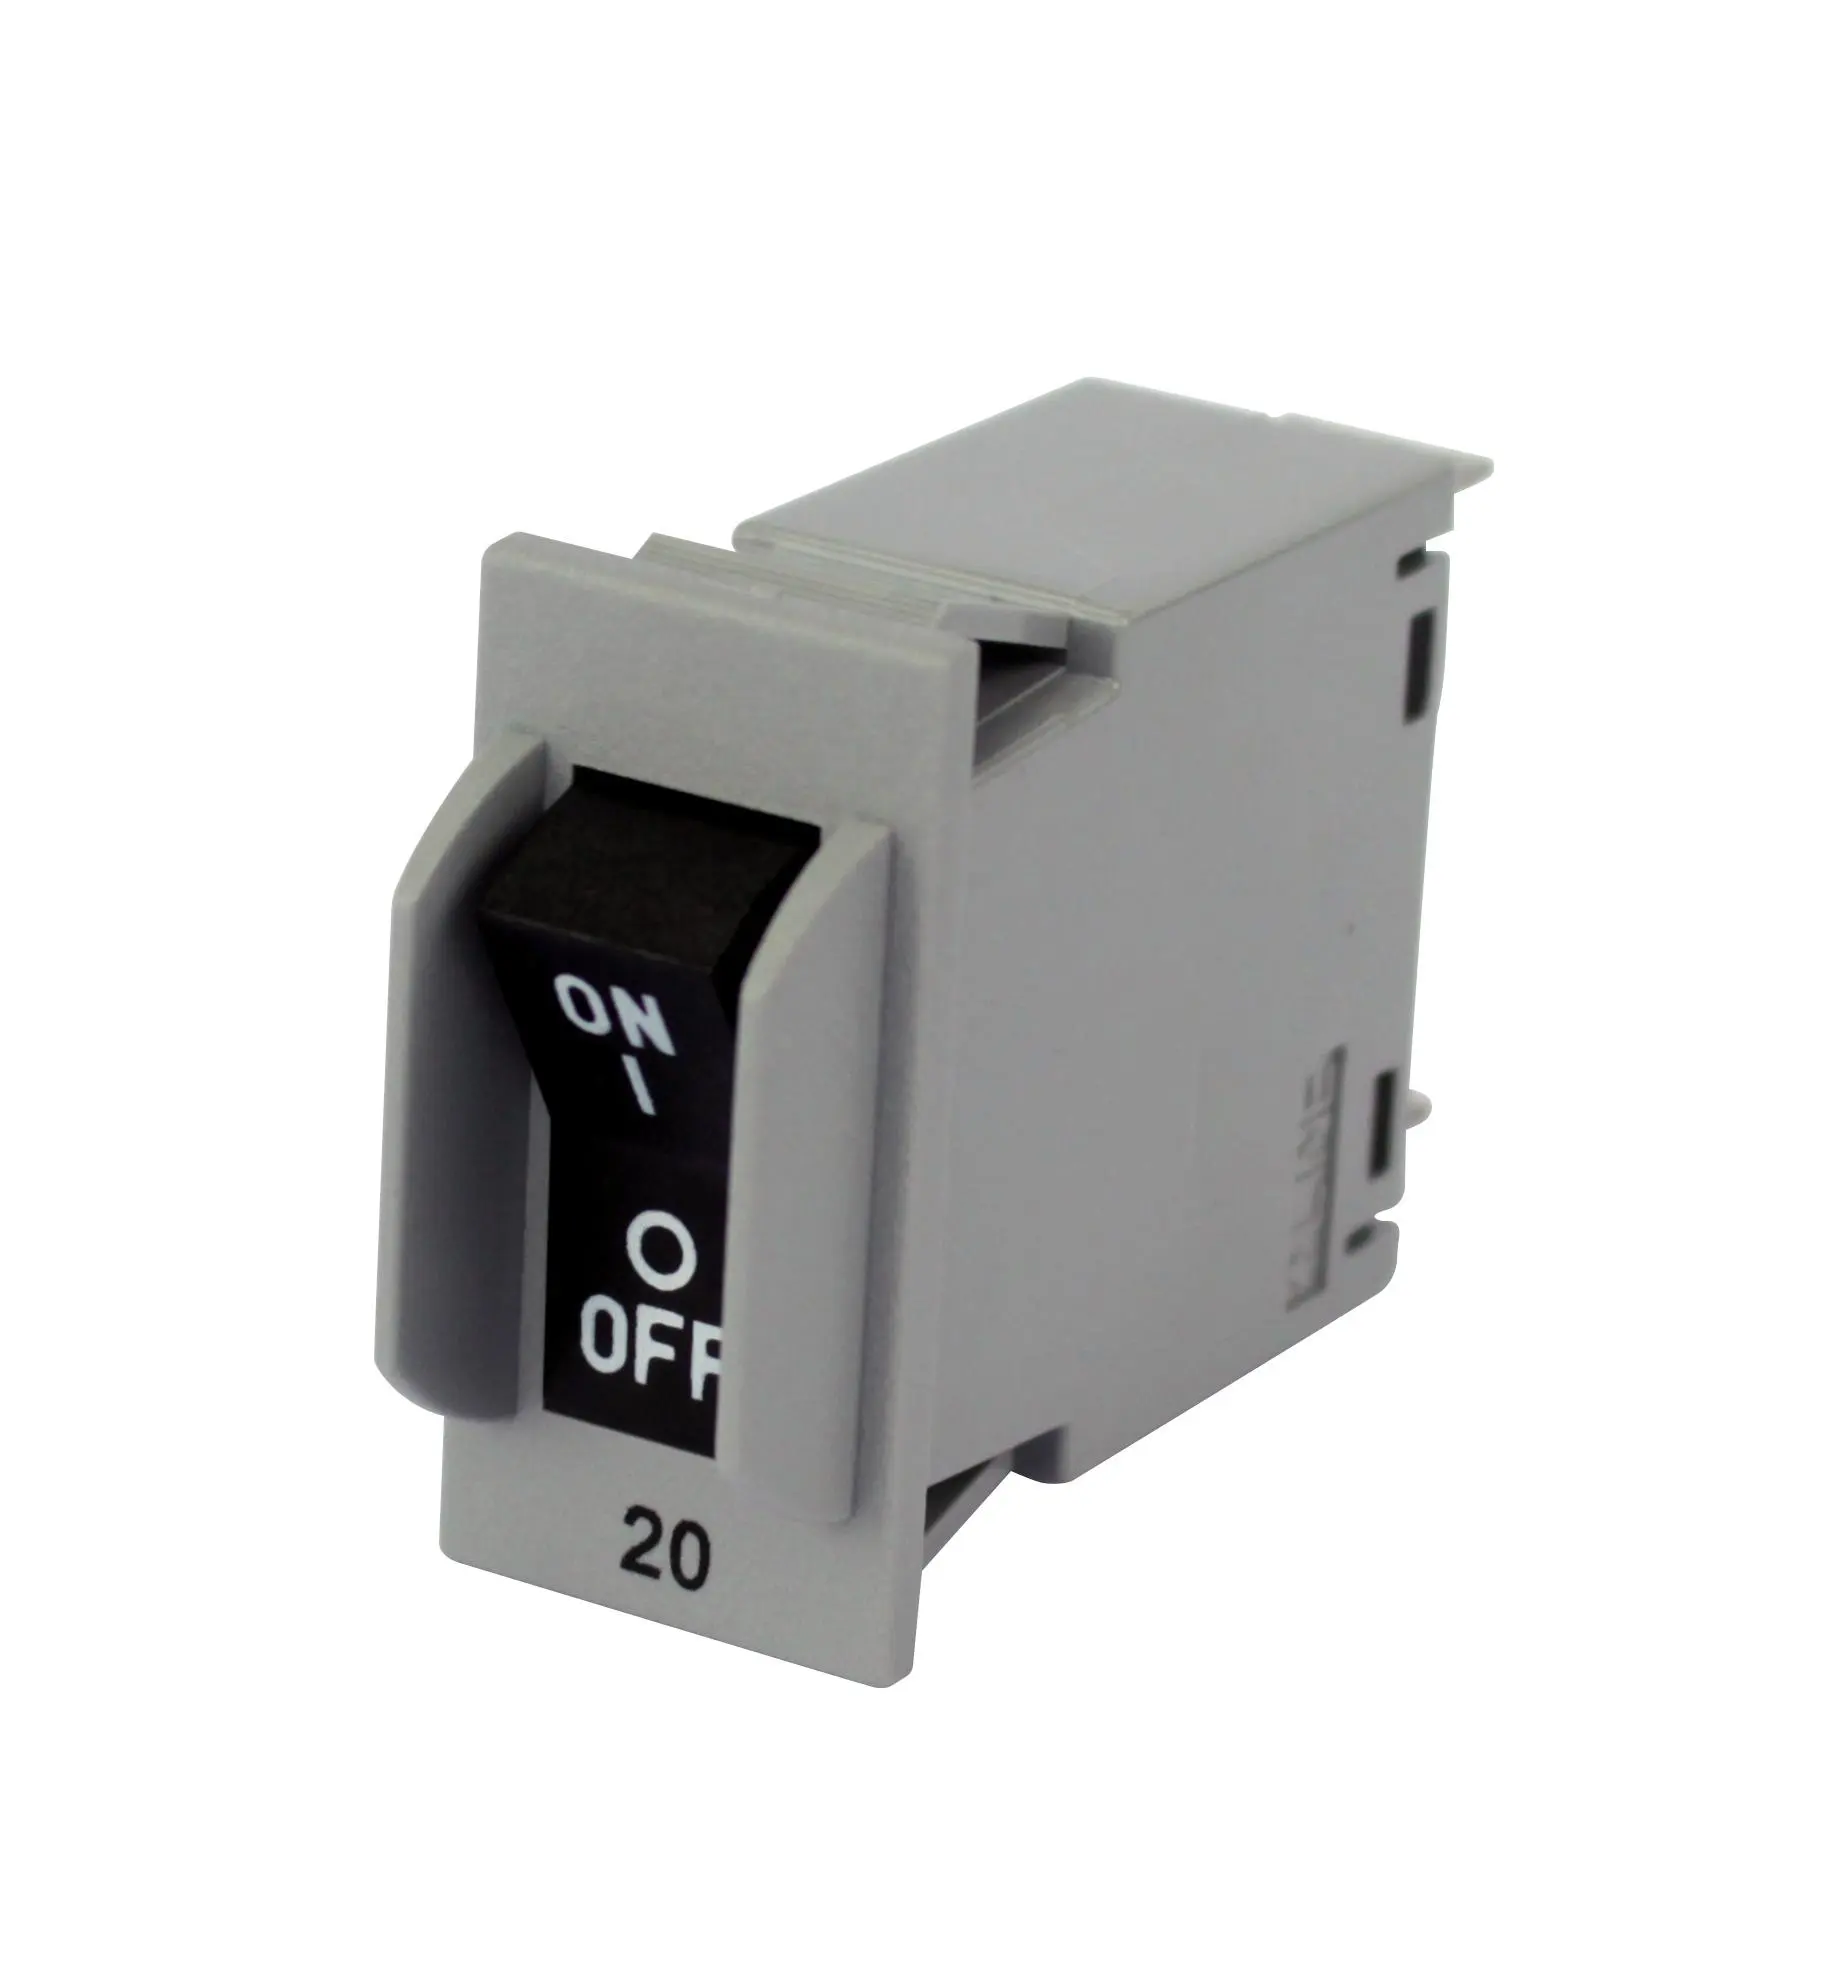 Actuator Hydraulic magnetic Electromagnetic Circuit Breaker For Power Protection Equipment